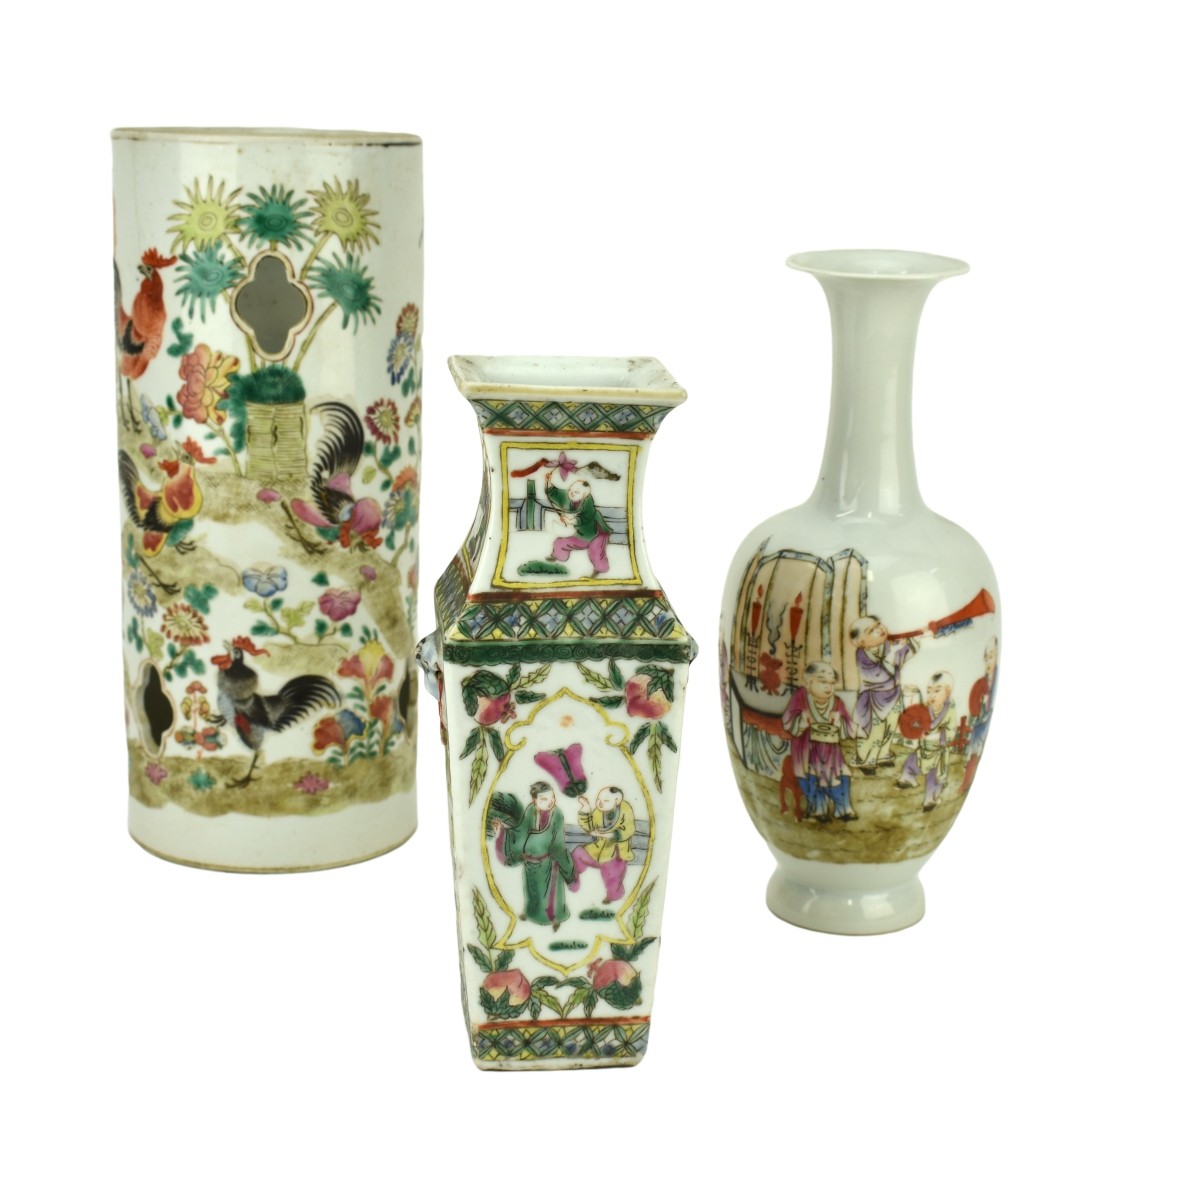 Grouping of Three (3) Antique Chinese Porcelain